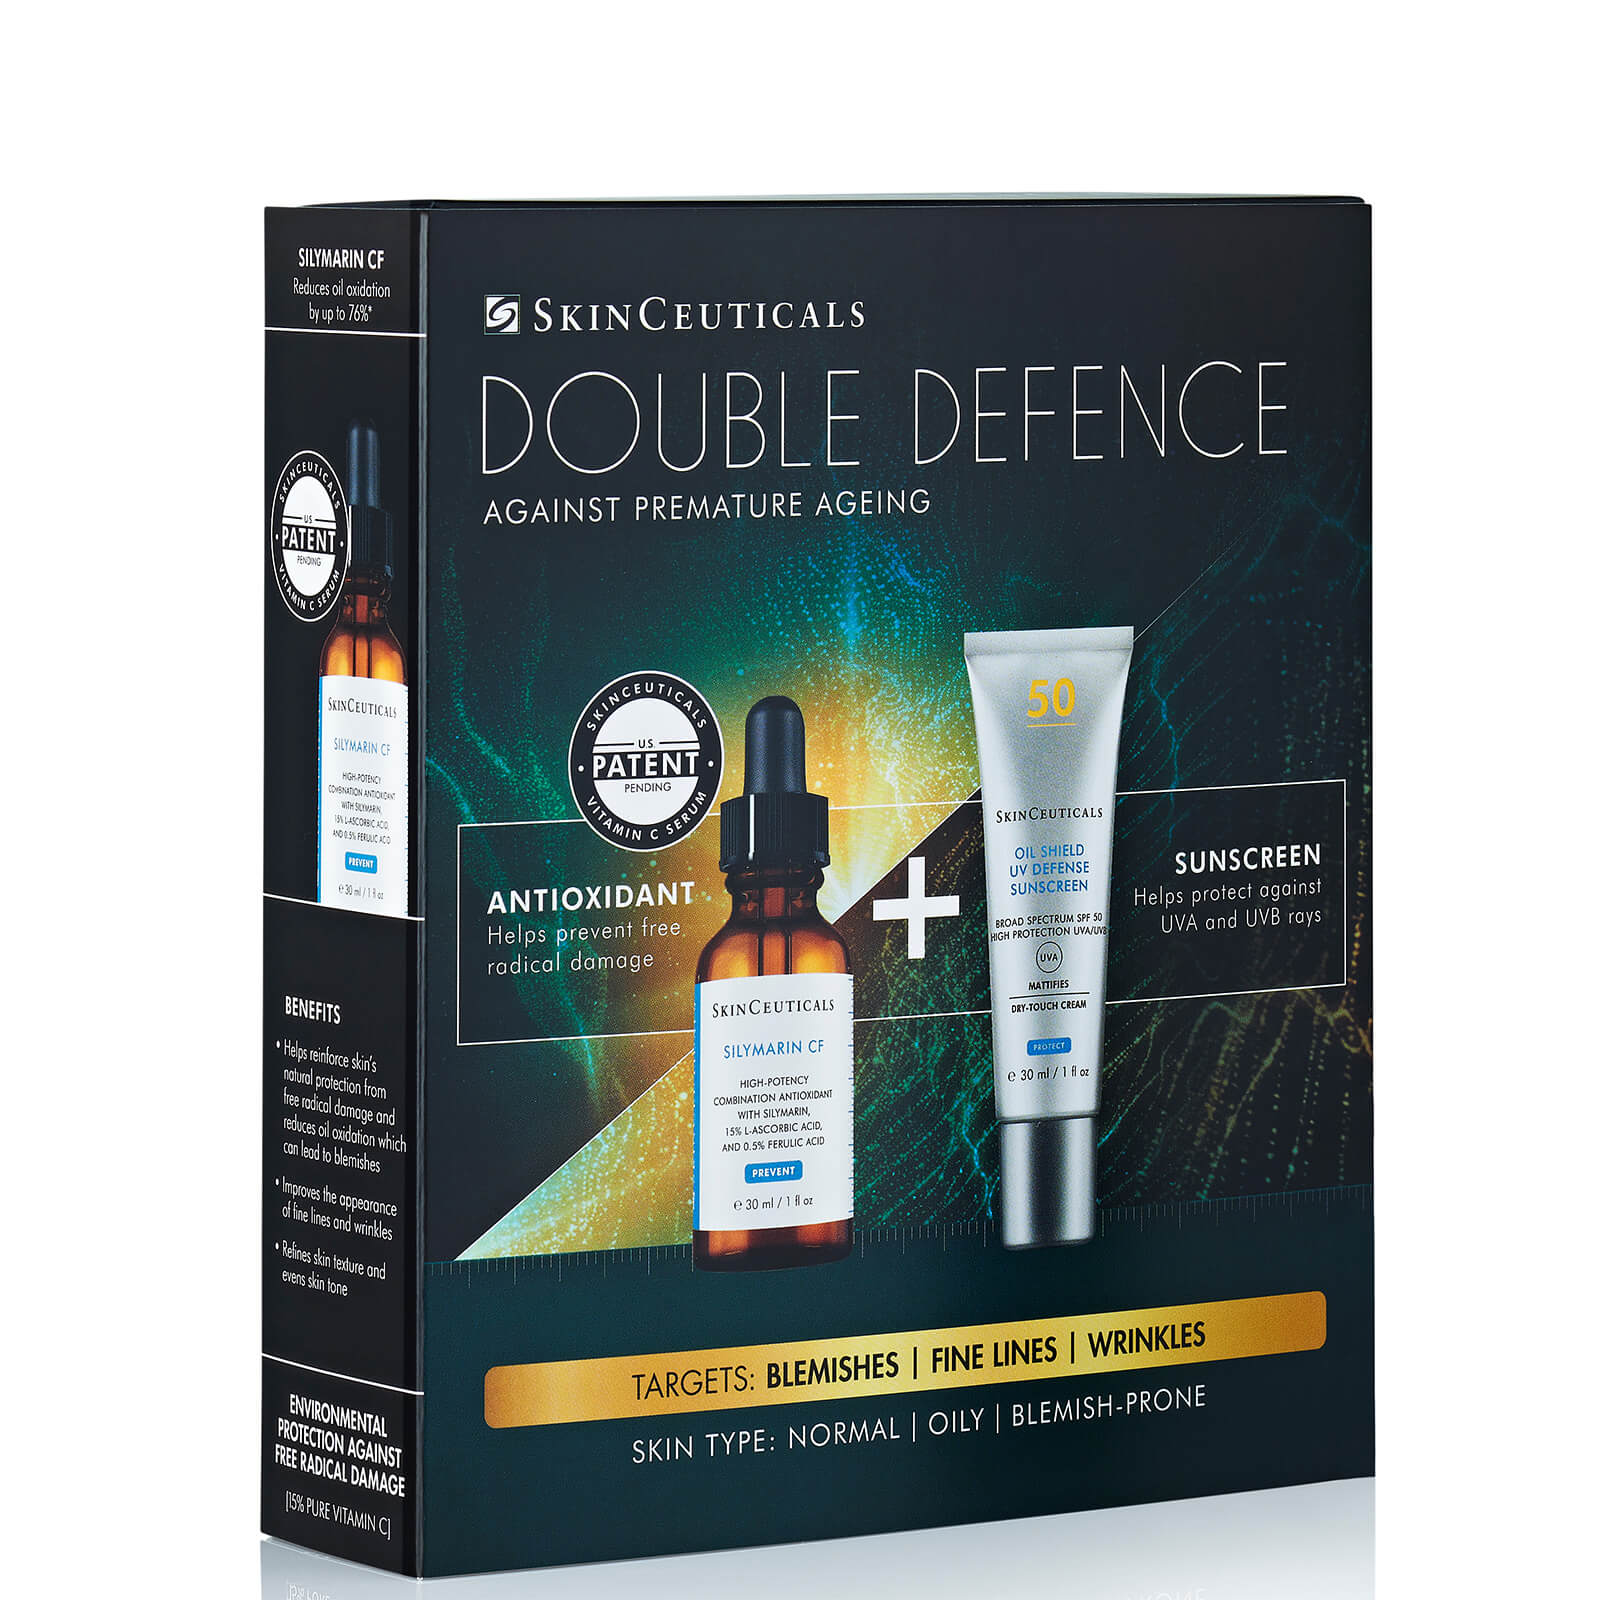 Image of SkinCeuticals Double Defence Silymarin CF Kit for Oily/Blemish-Prone Skin